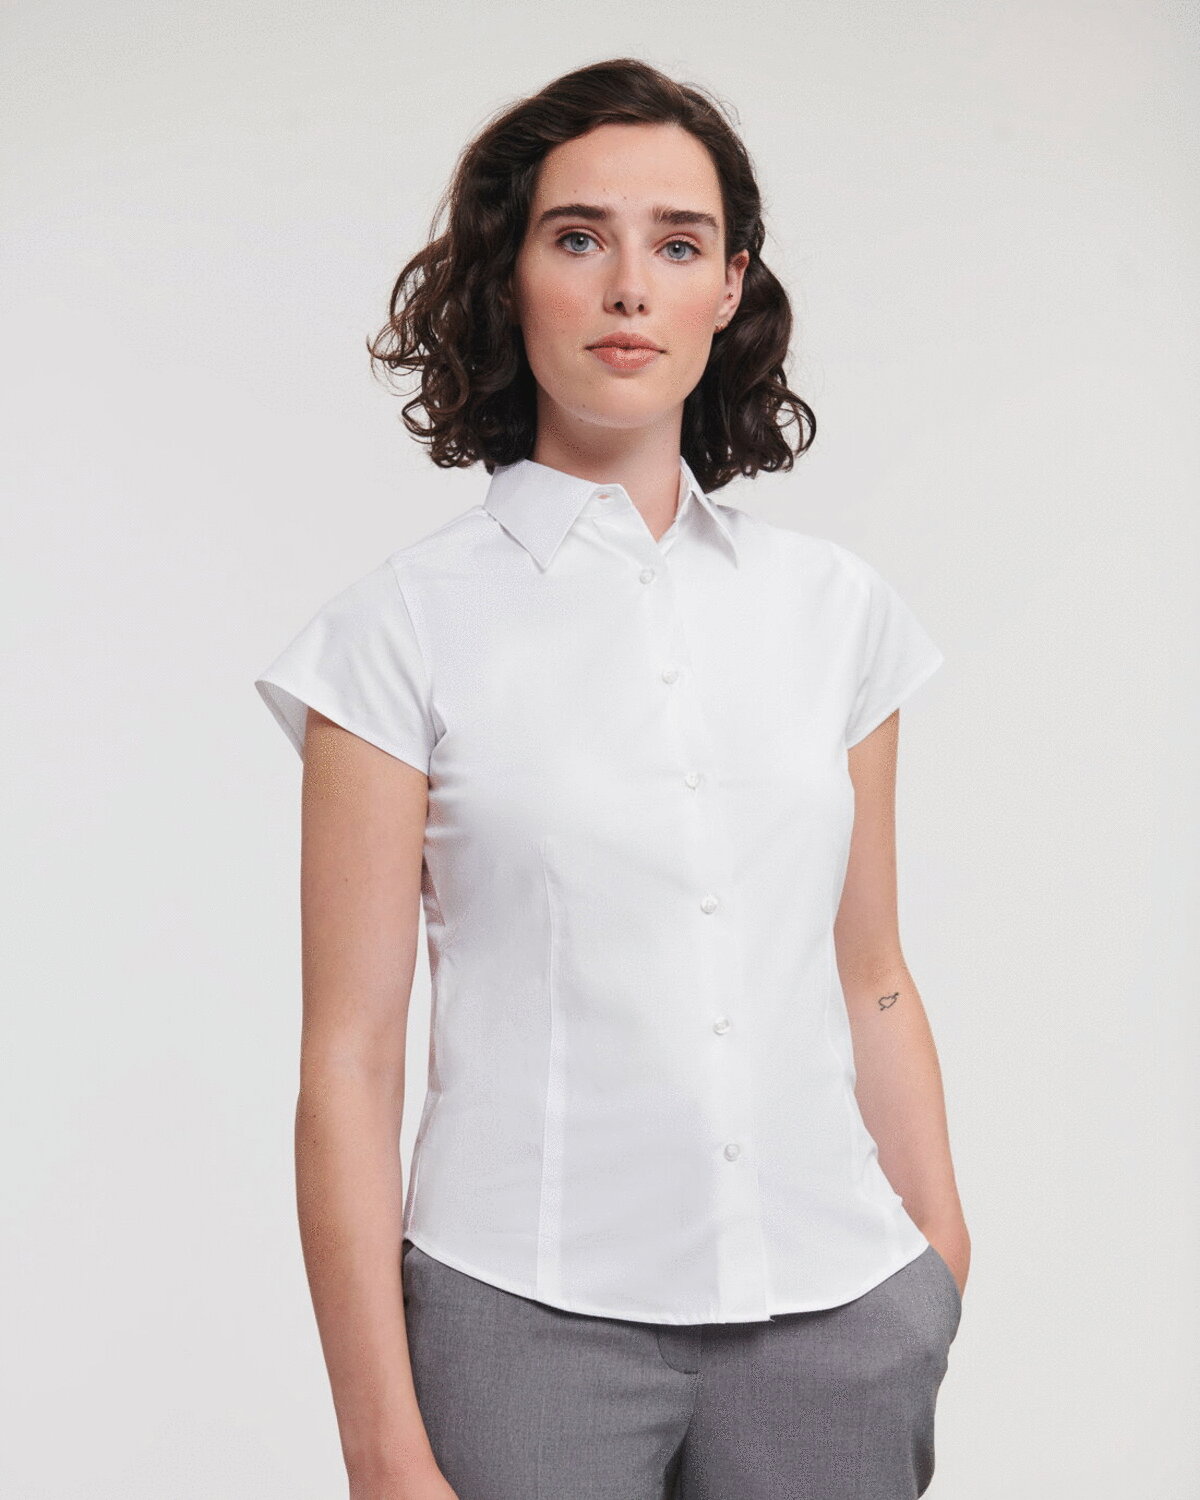 LADIES SHORT SLEEVE FITTED SHIRT